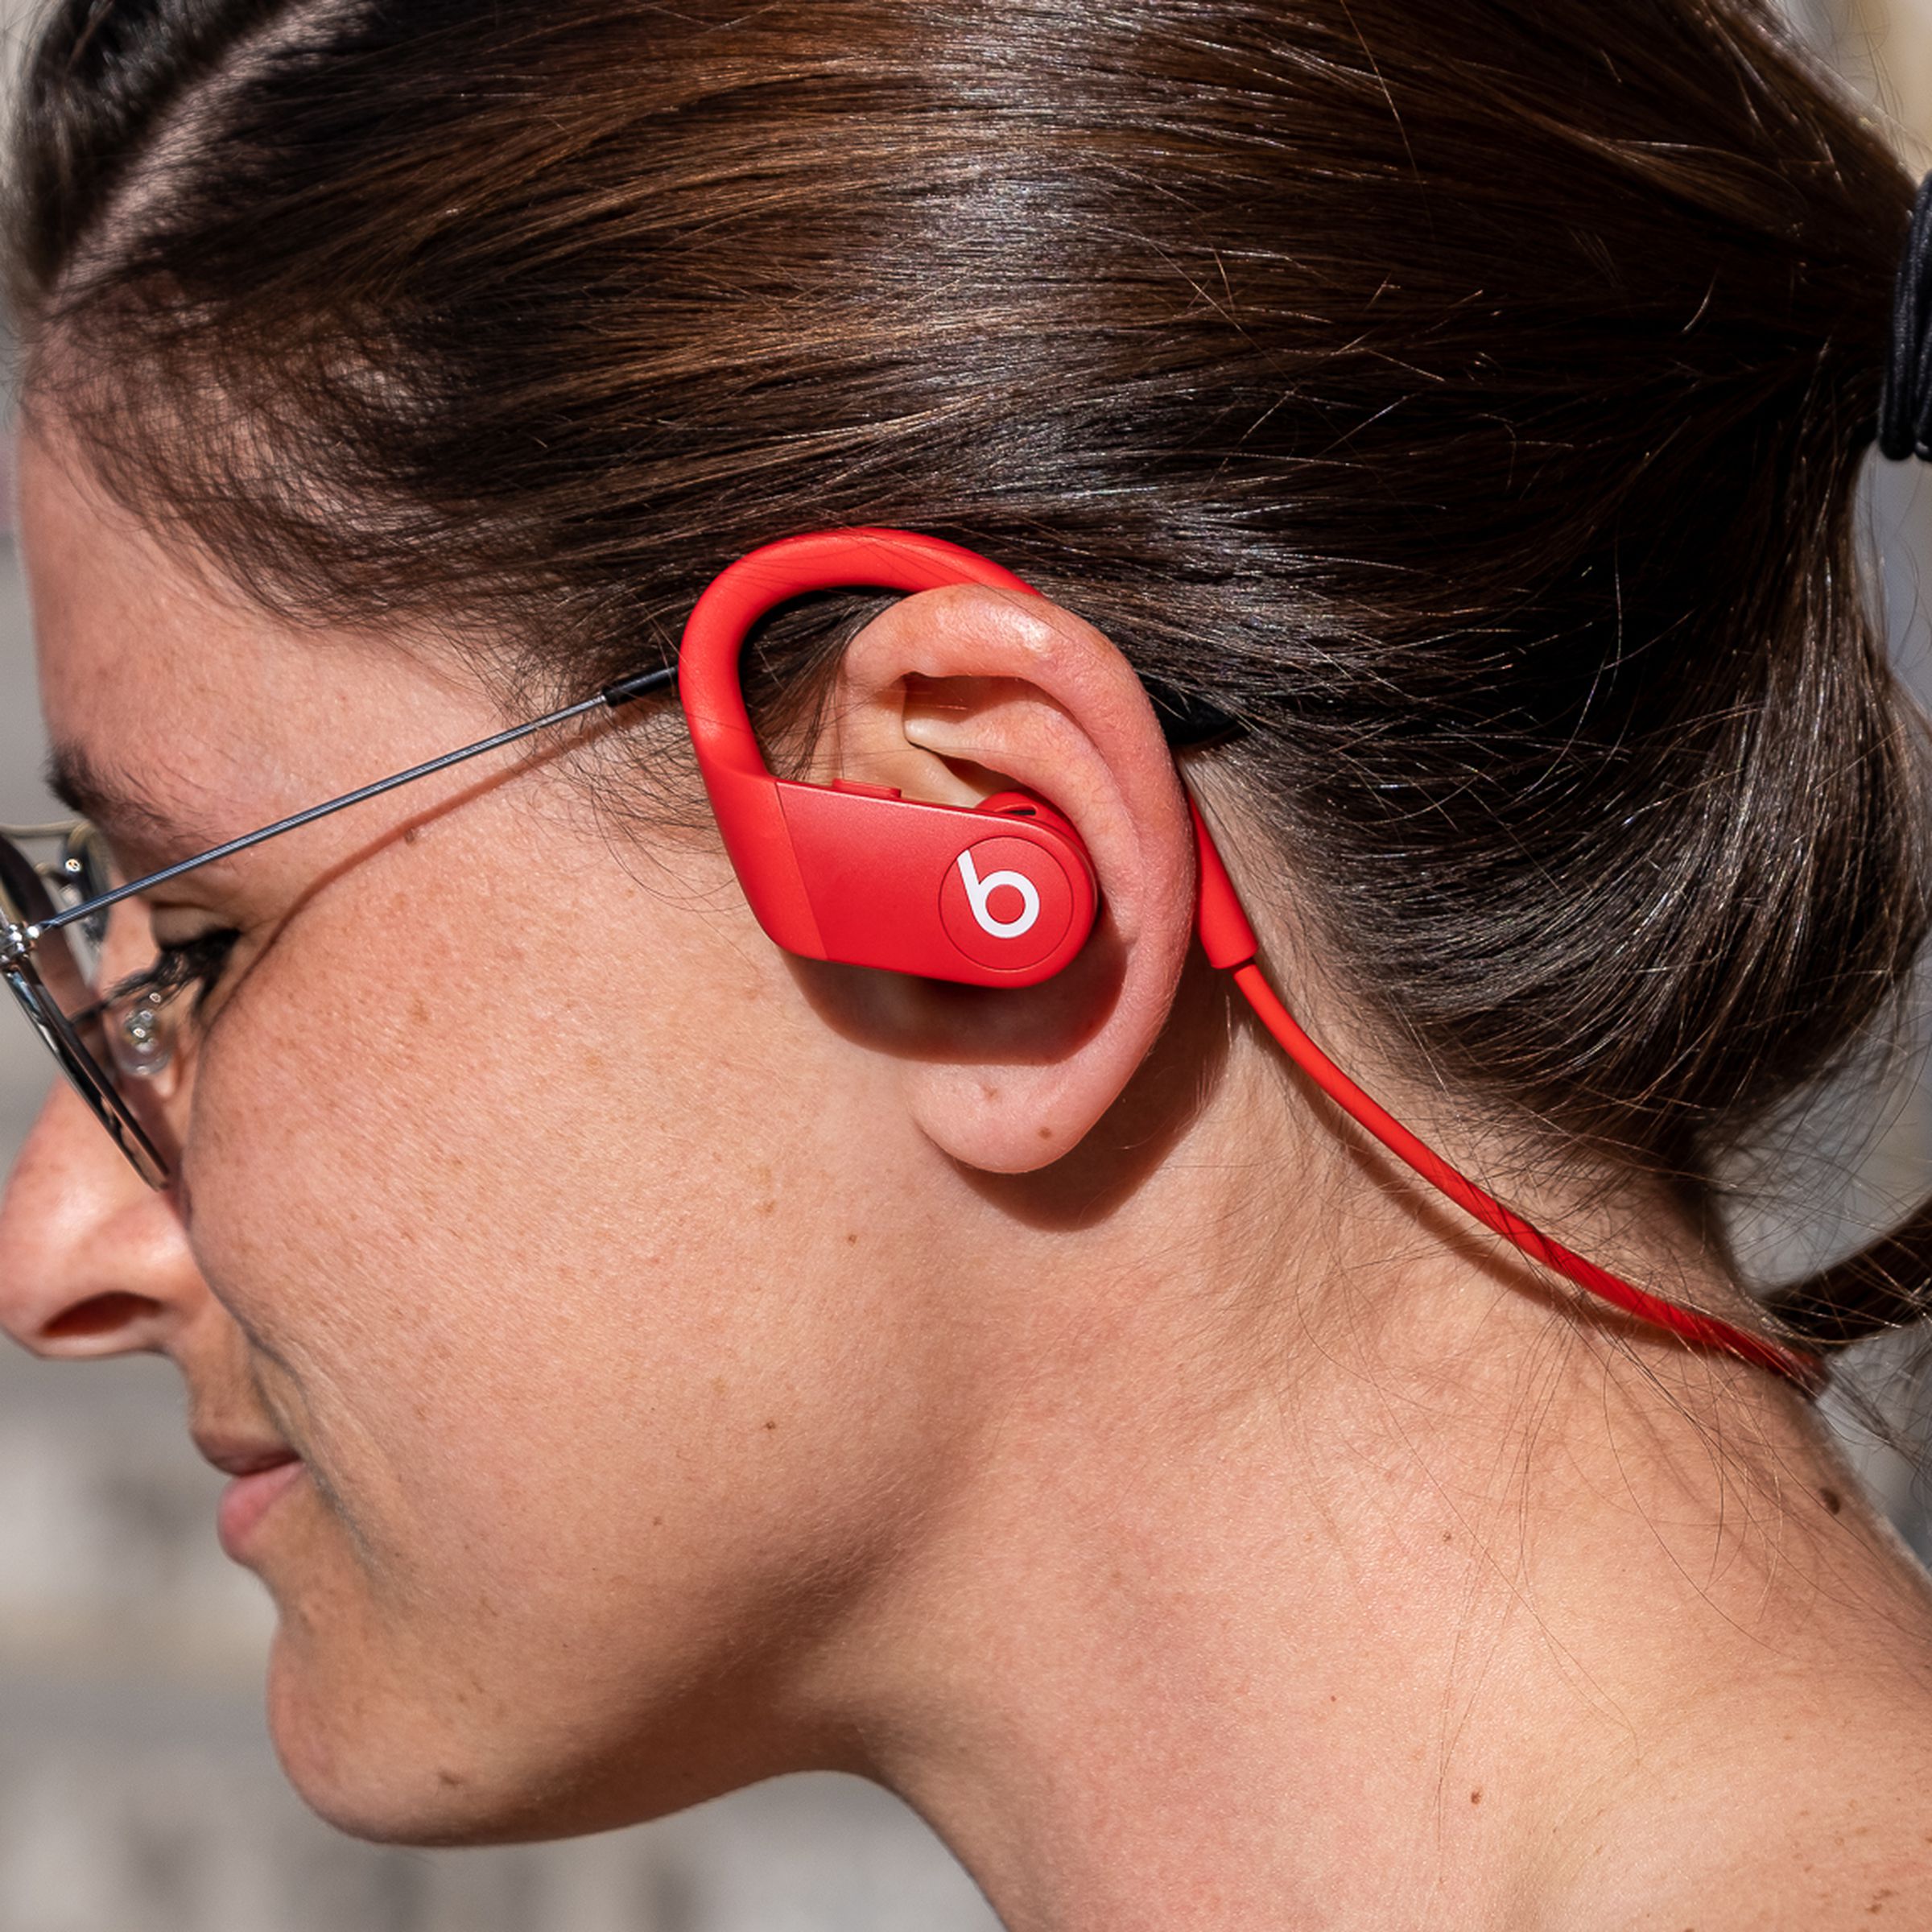 Powerbeats 4 earbuds seen from a side profile view.